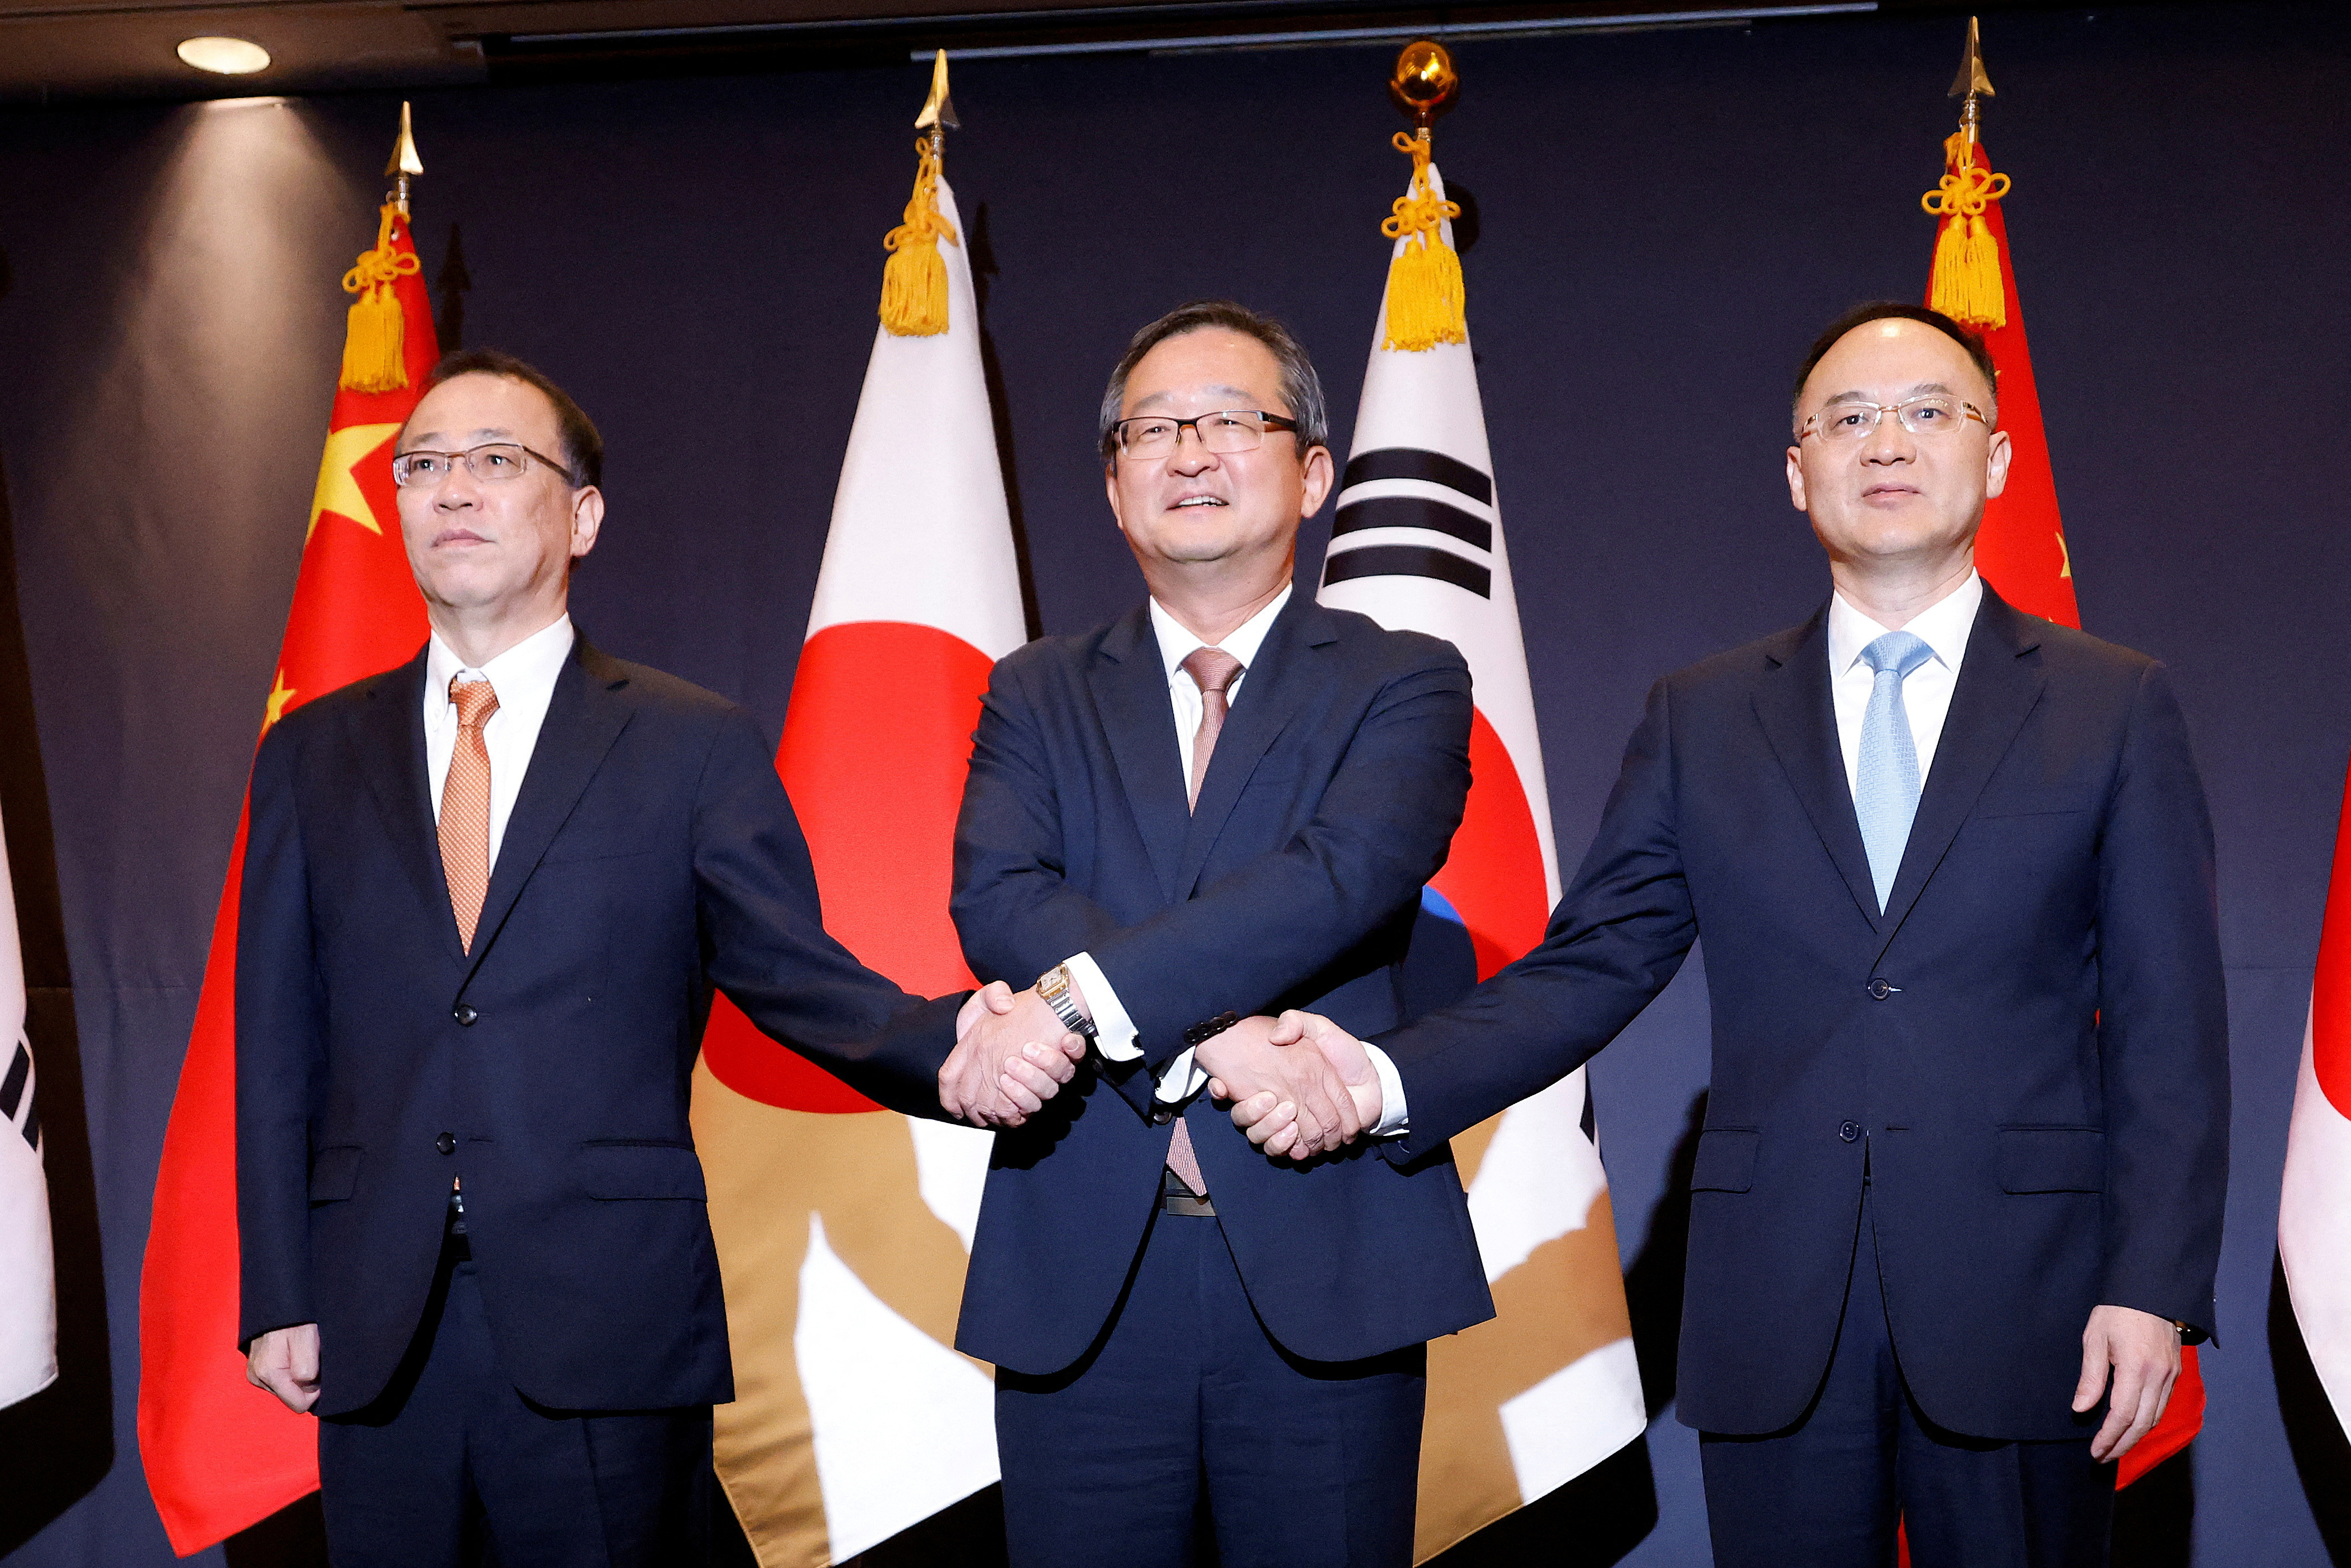 South Korea's deputy foreign minister for political affairs, Chung Byung-won, Japan's Senior Deputy Minister for Foreign Affairs, Funakoshi Takehiro, and China's Assistant Foreign Minister, Nong Rong, pose for photographs during their meeting in Seoul